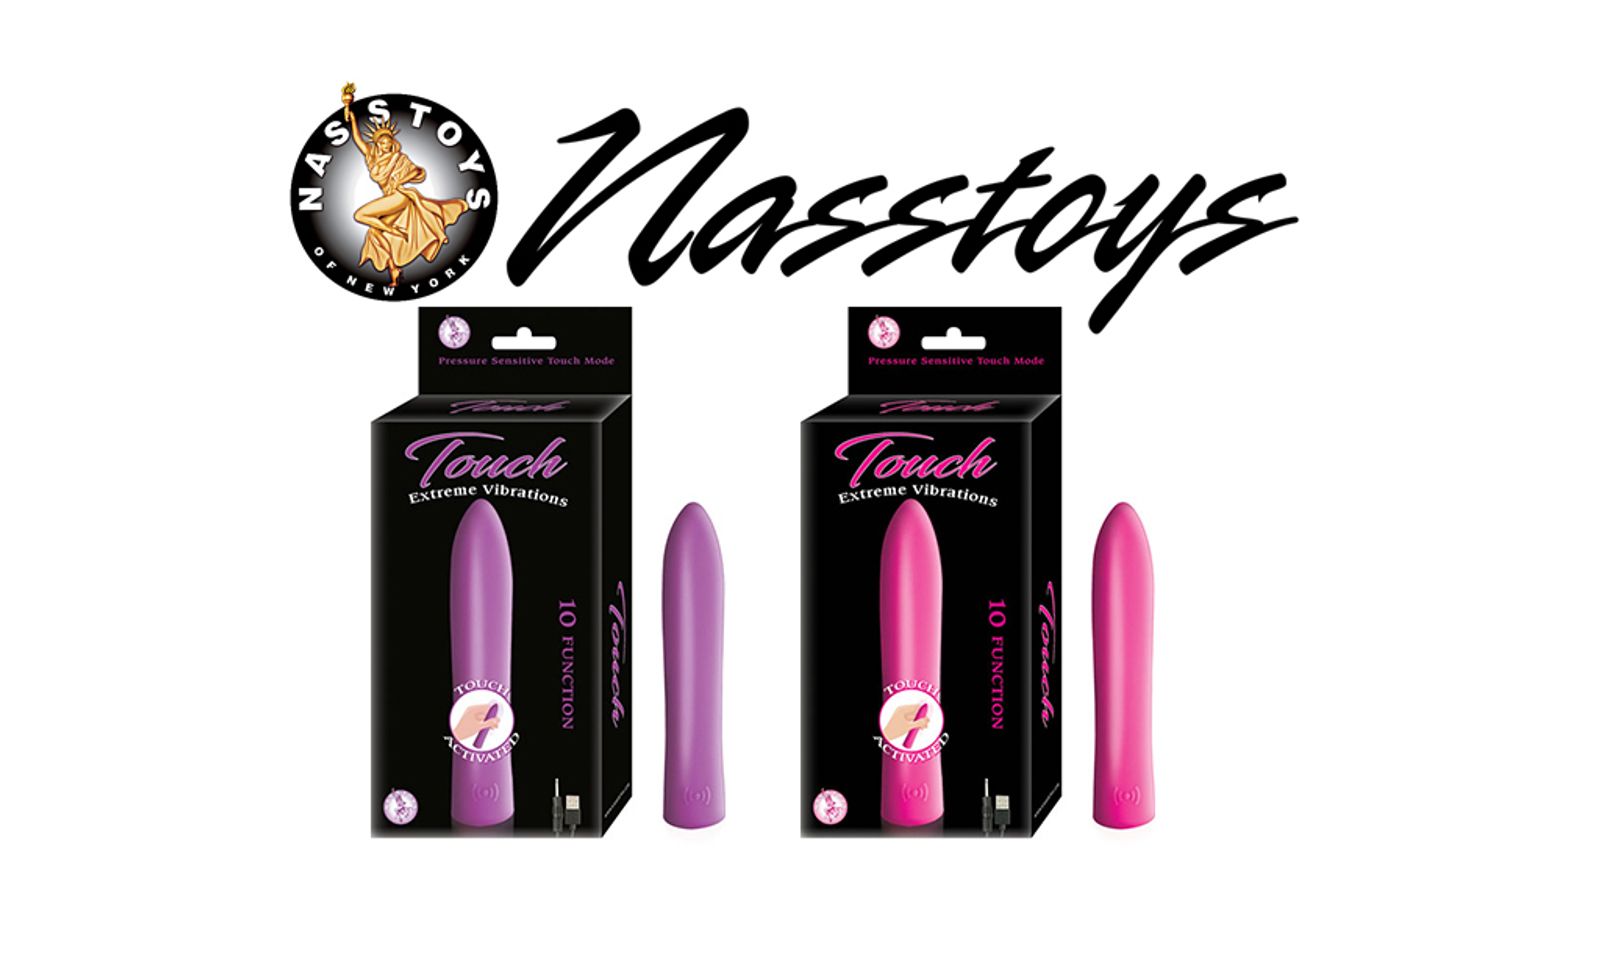 Nasstoys Seeing Brisk Sales for Touch Extreme Vibrations